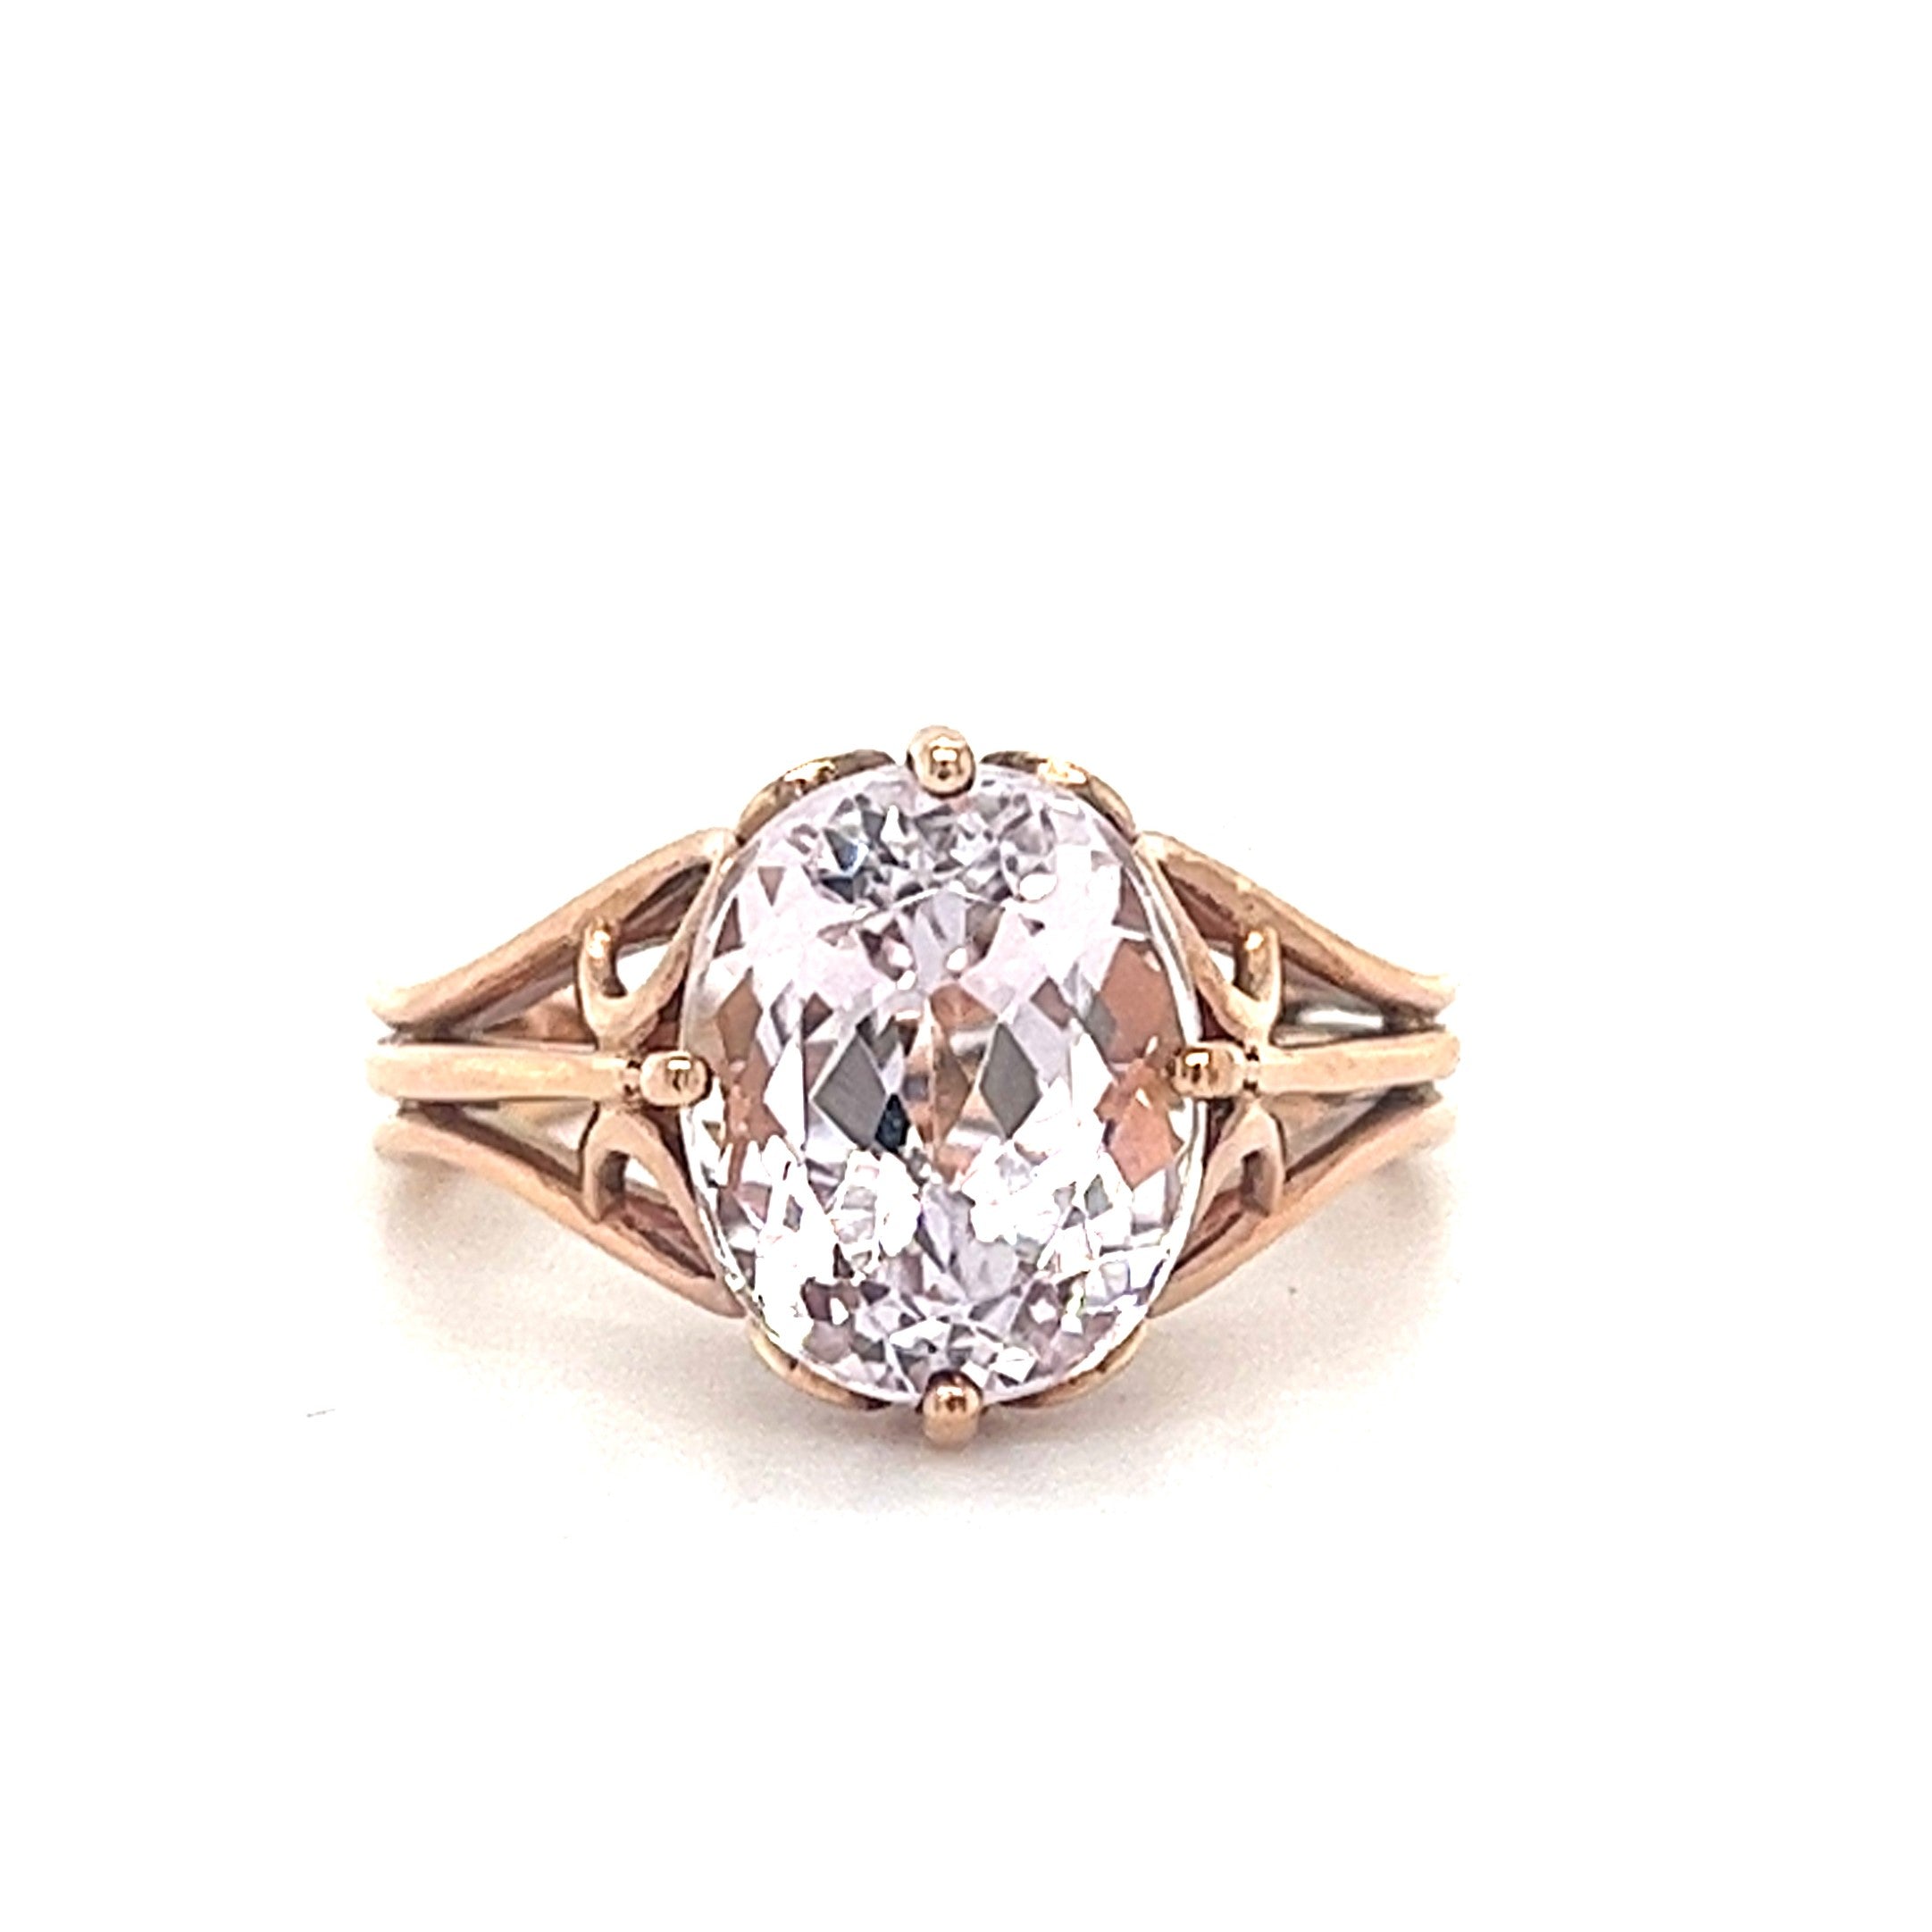 10KT ROSE GOLD WITH PINK STONE LADIES RING